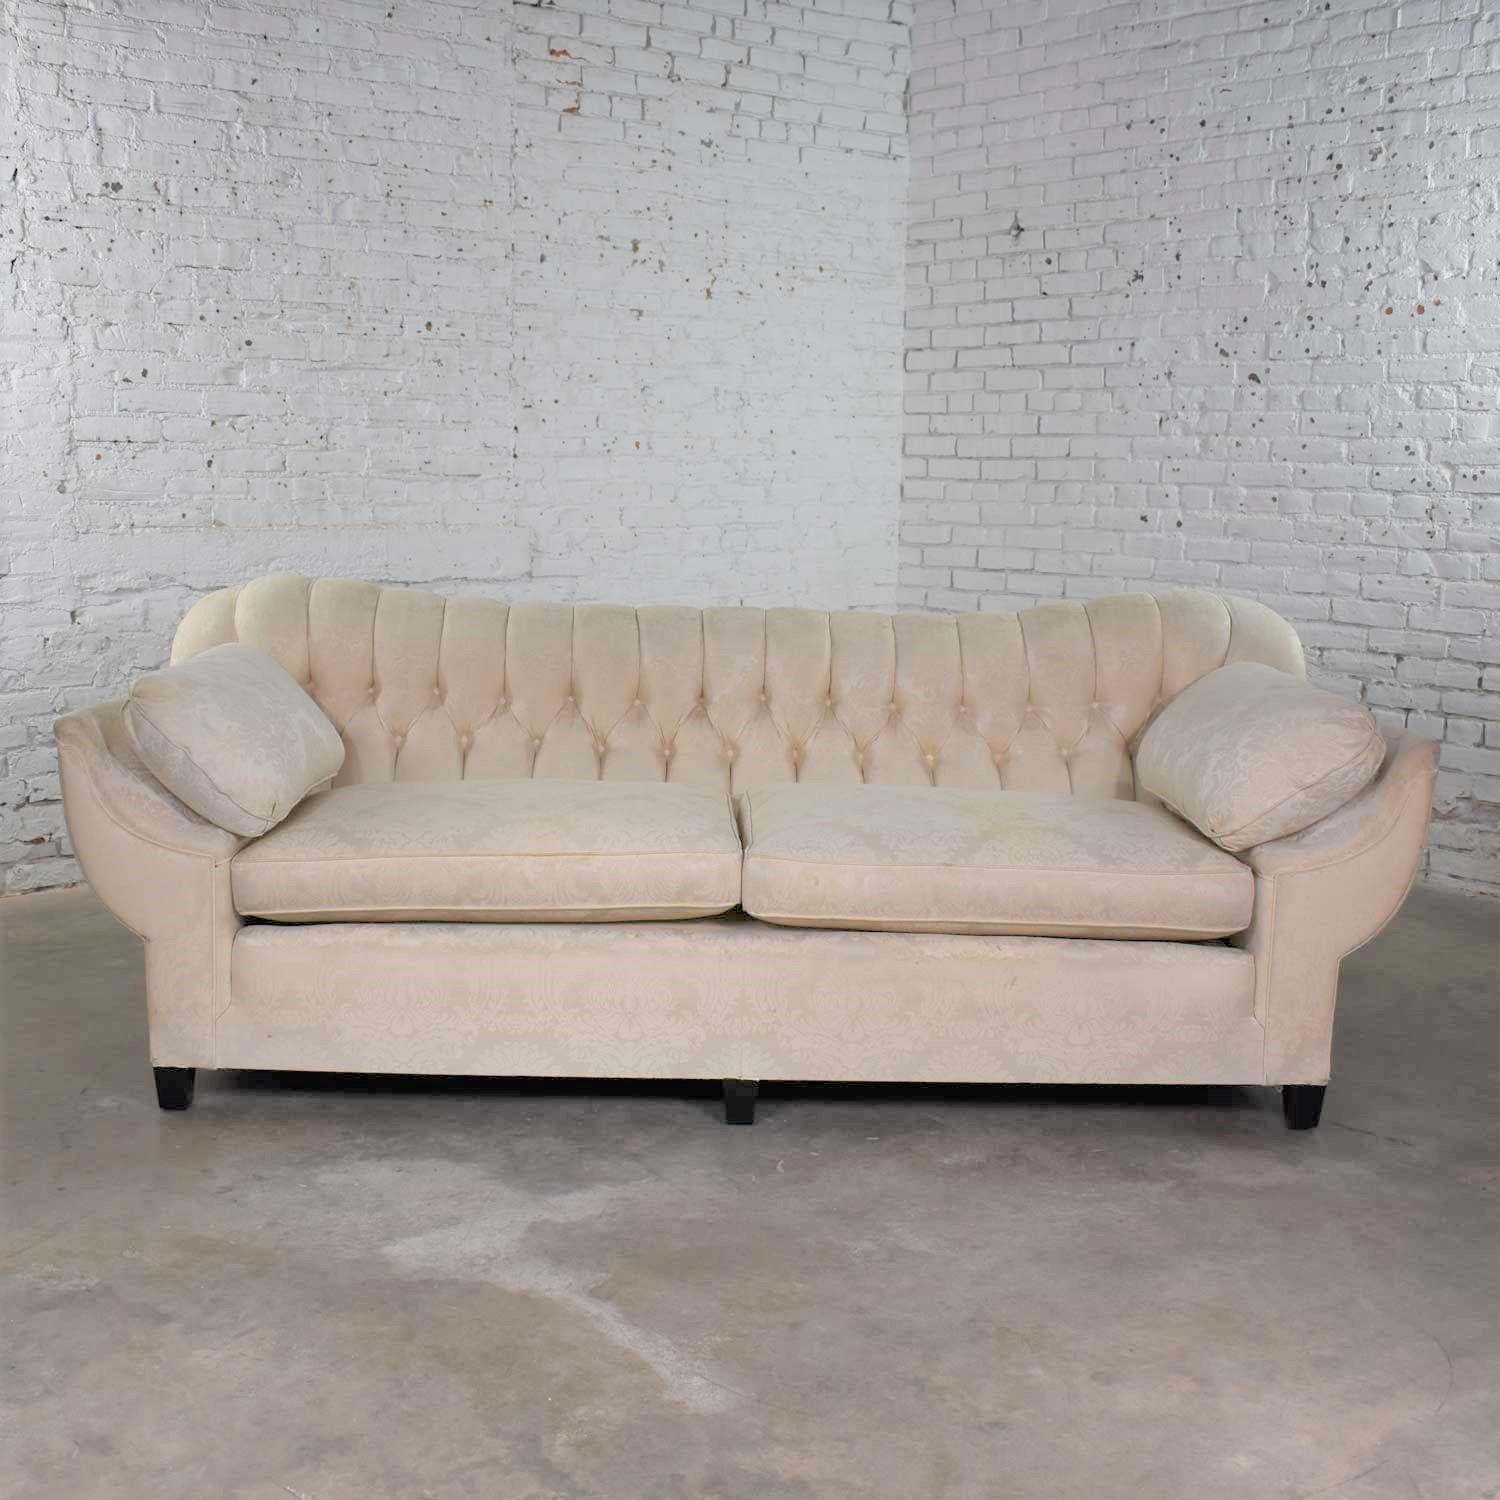 Fabulous vintage Art Deco or Hollywood Regency sofa with a tufted back and concave pillowed arms. The sofa is in solid wonderful condition, but its original white damask fabric will need to be replaced even though we have had it cleaned. We did that